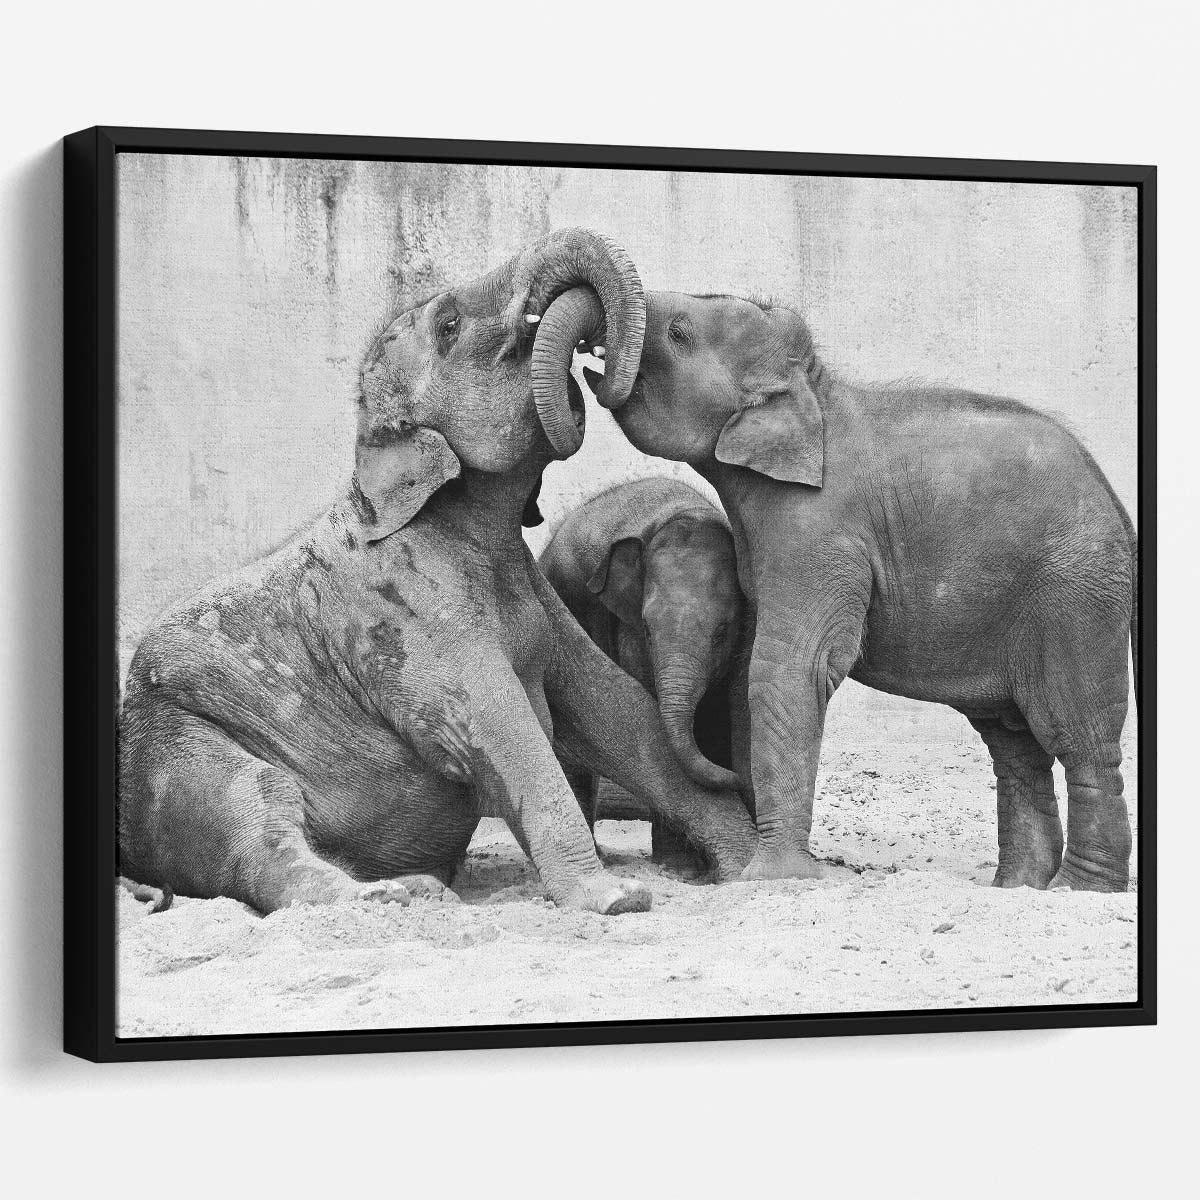 Monochrome Elephant Family Embrace & Play Wall Art by Luxuriance Designs. Made in USA.